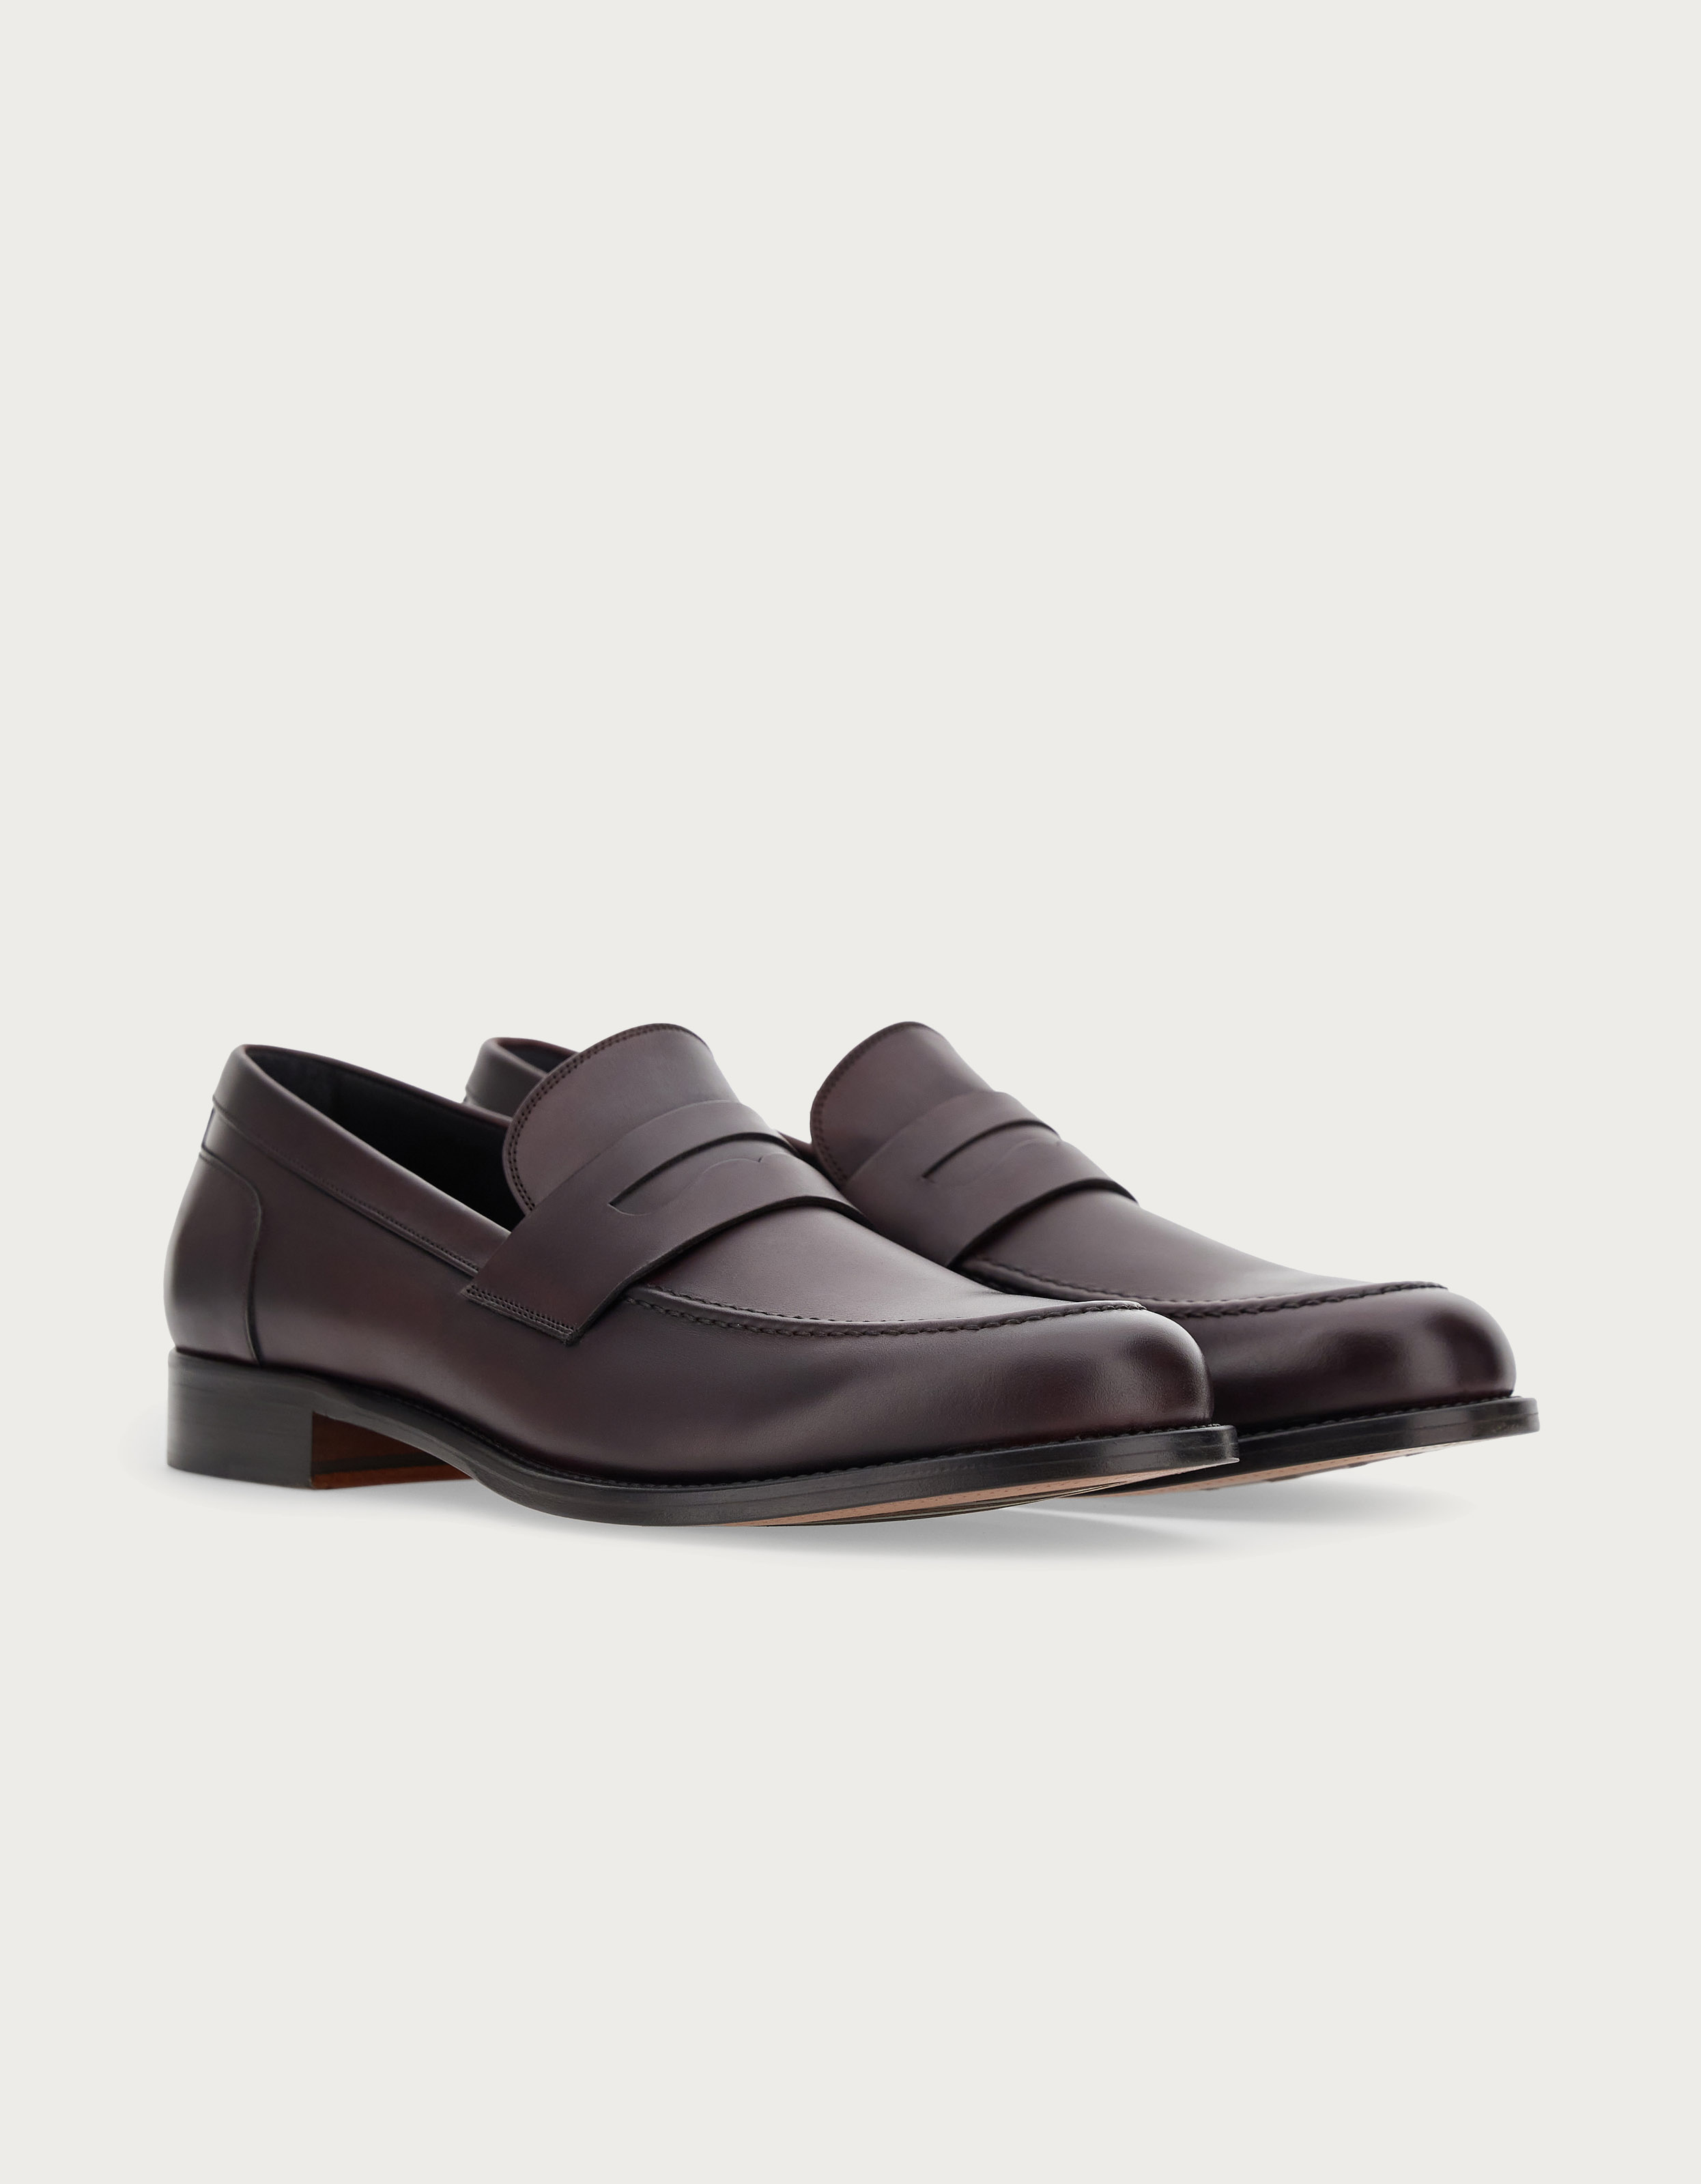 Italian luxury shoes for men - Canali US